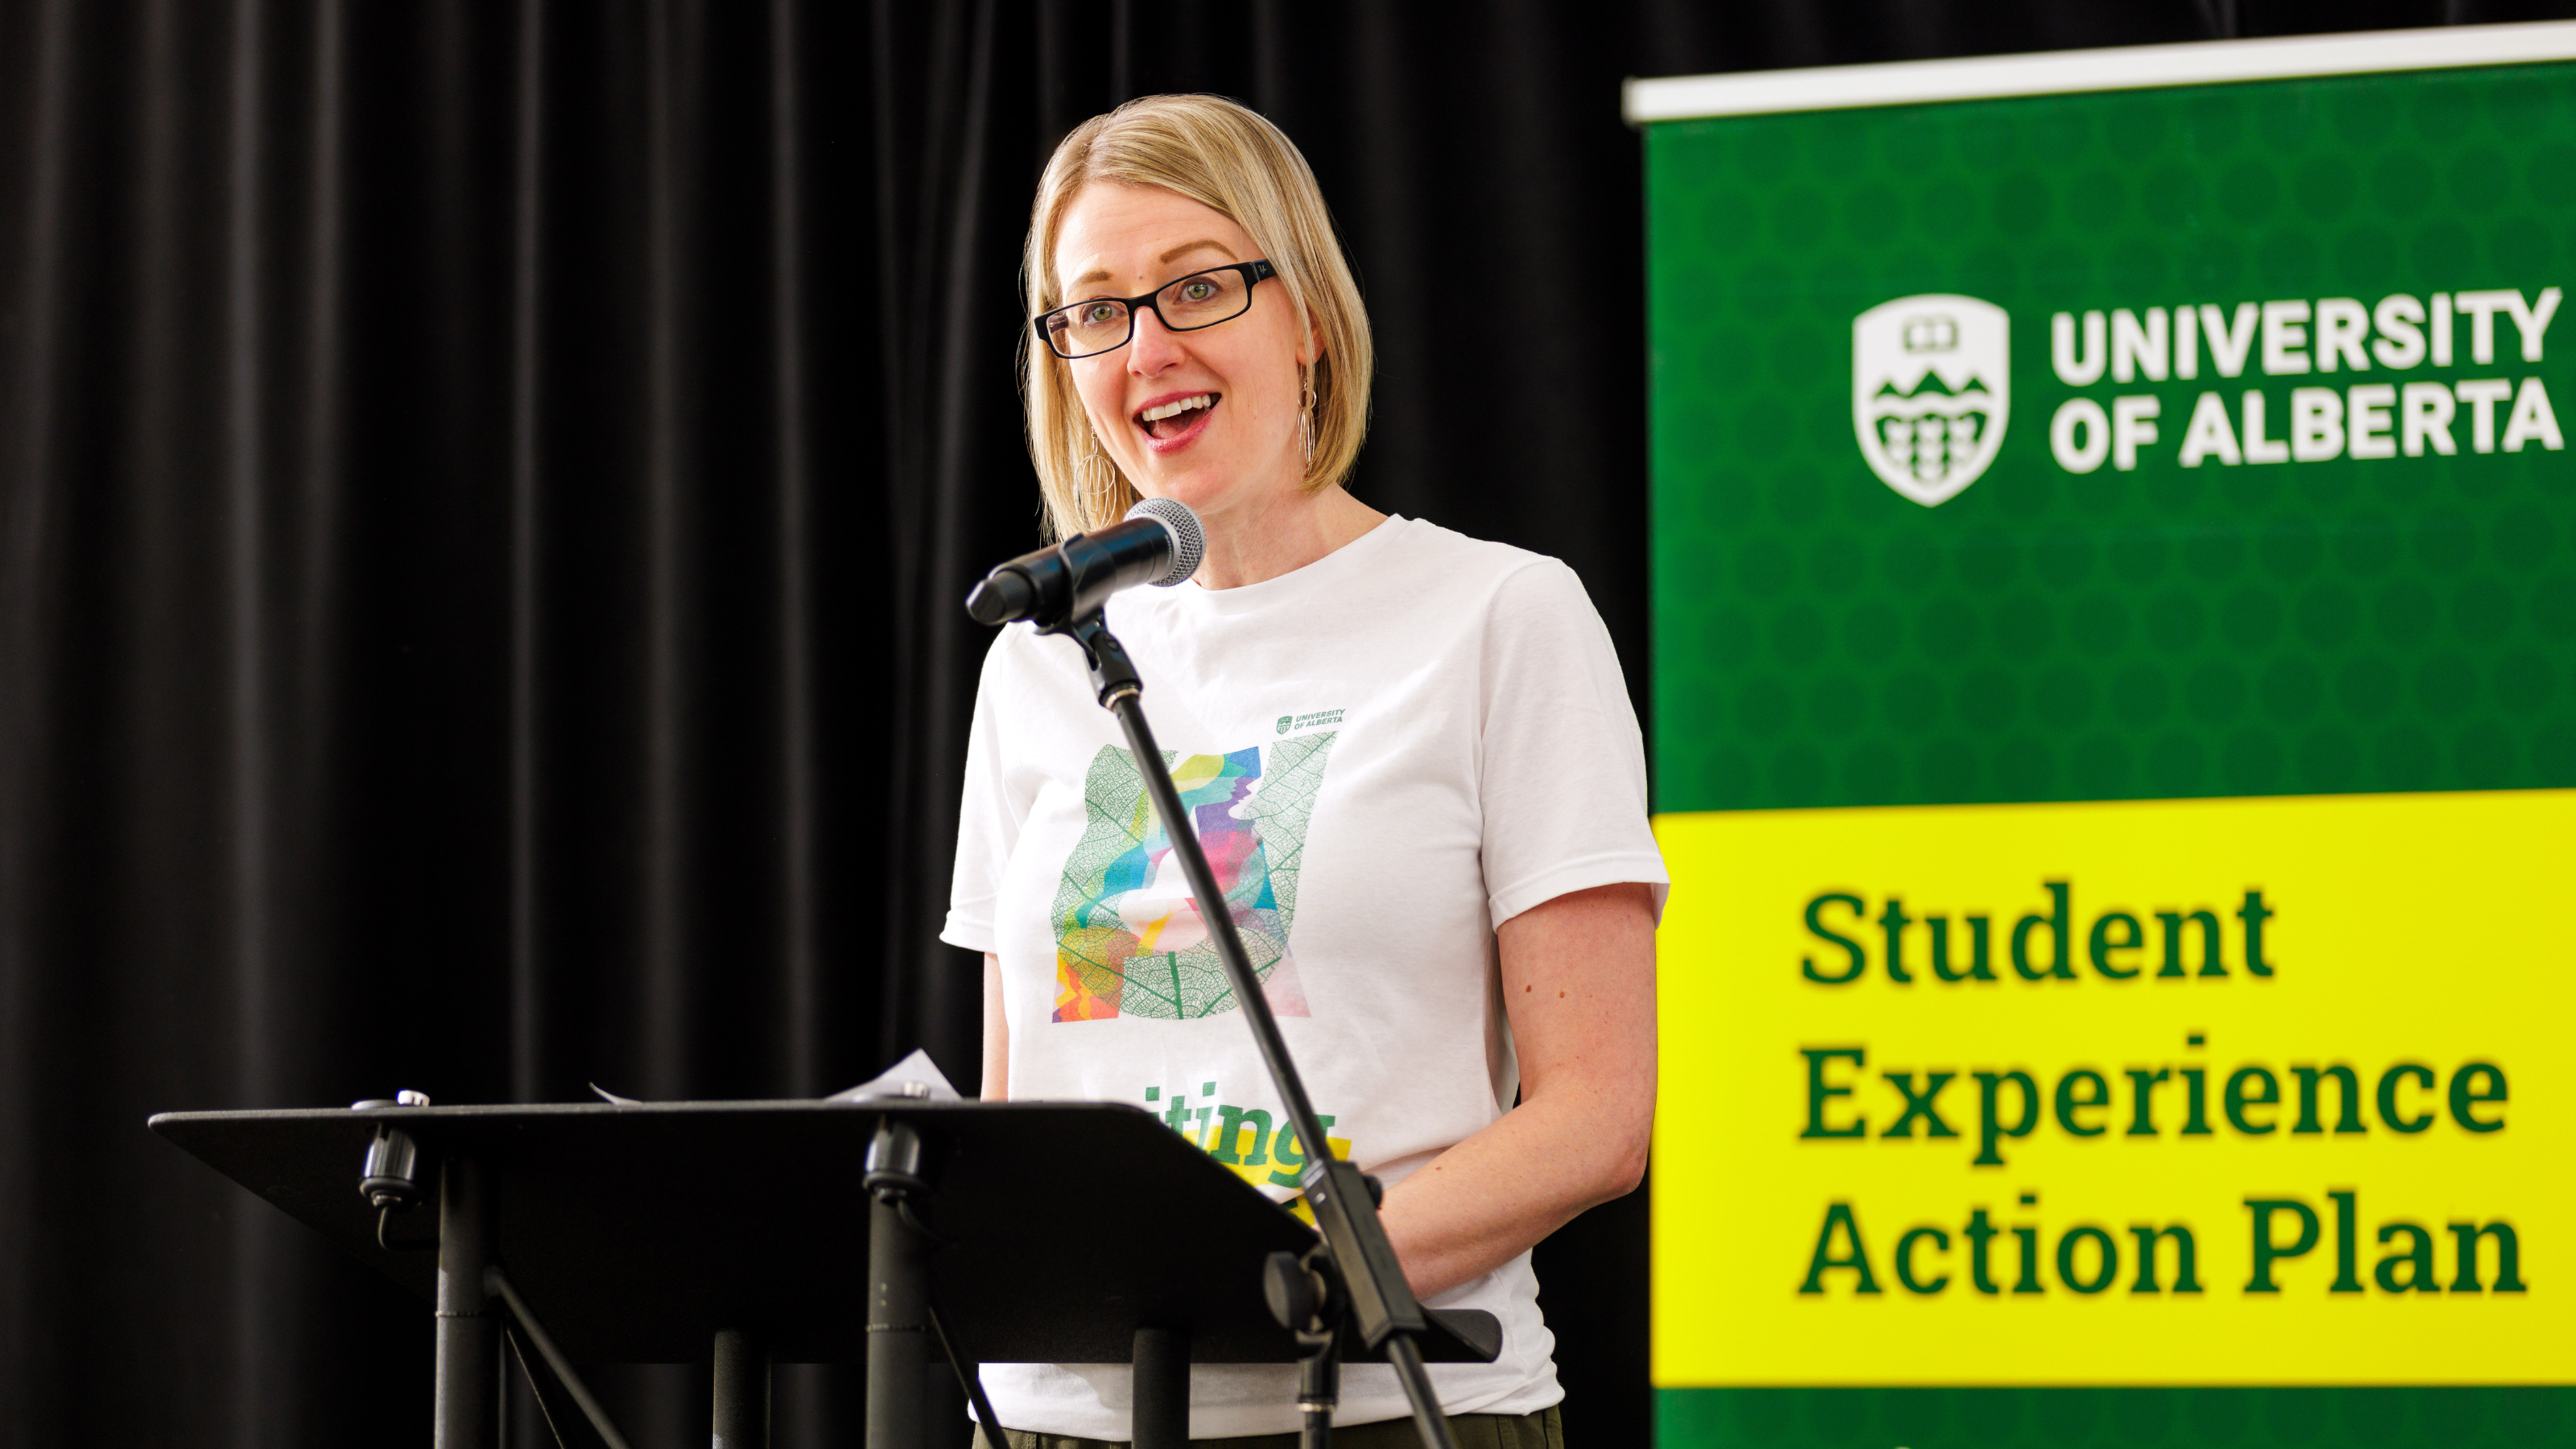 Melissa Padfield speaks at Student Experience Action Plan event on Jan. 31.